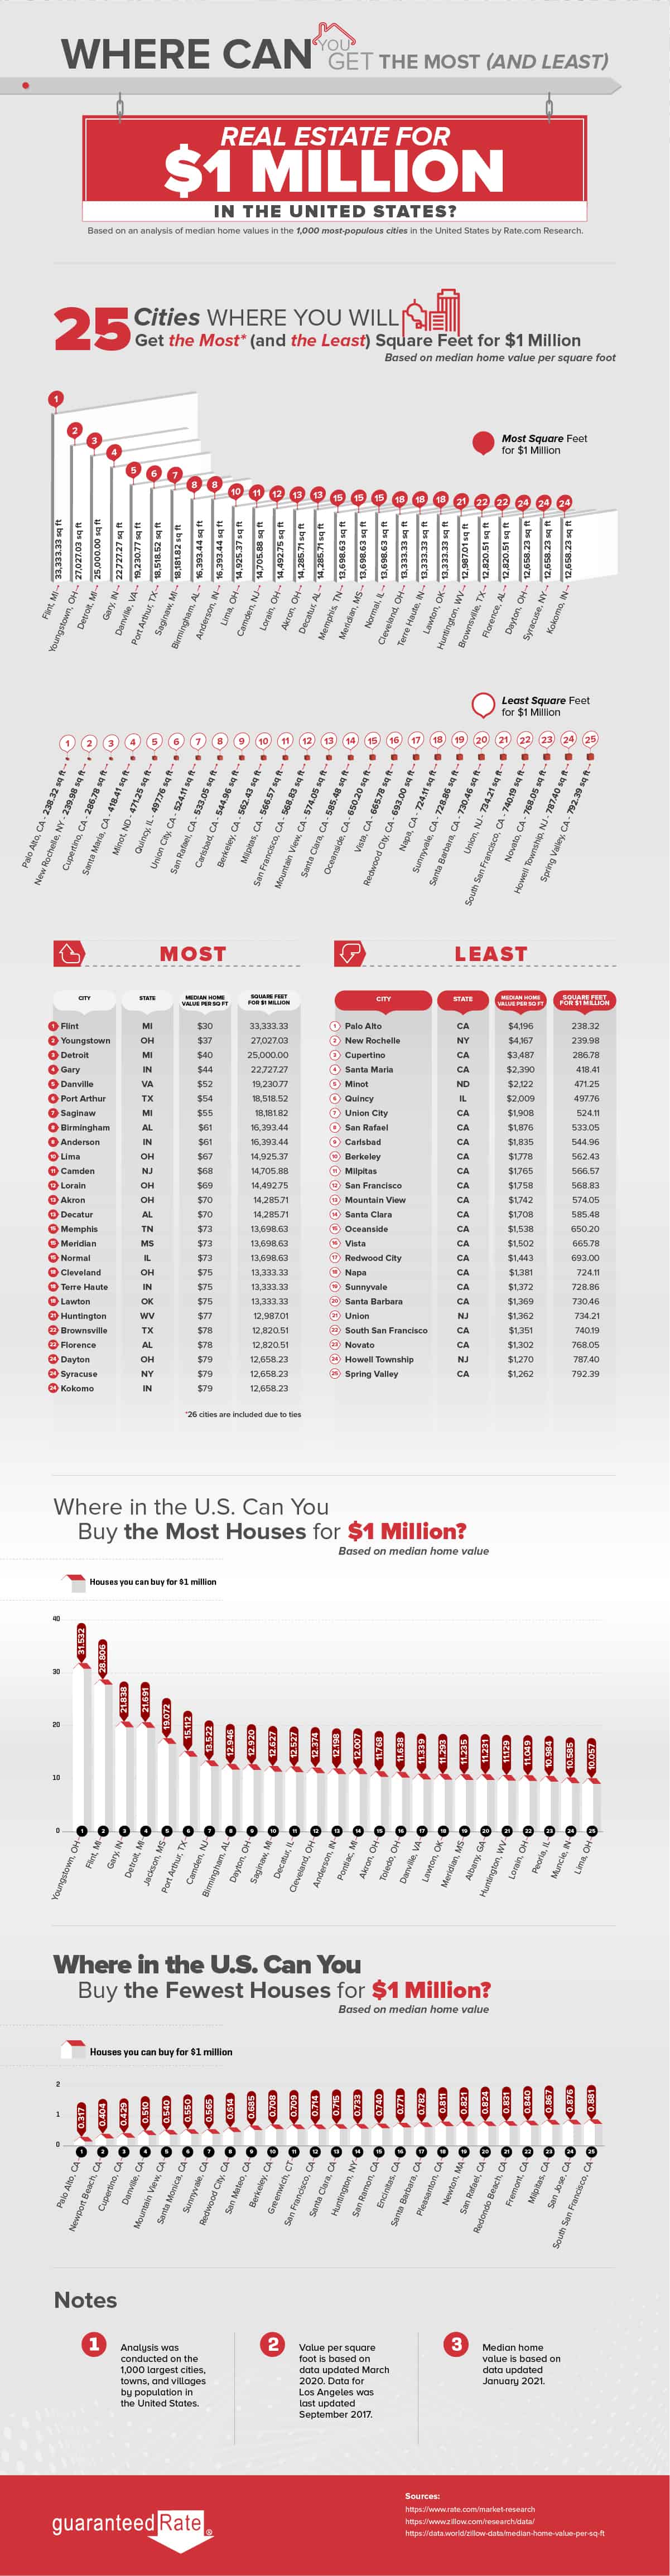 Where Can You Get the Most Real Estate for $1 Million in the United States